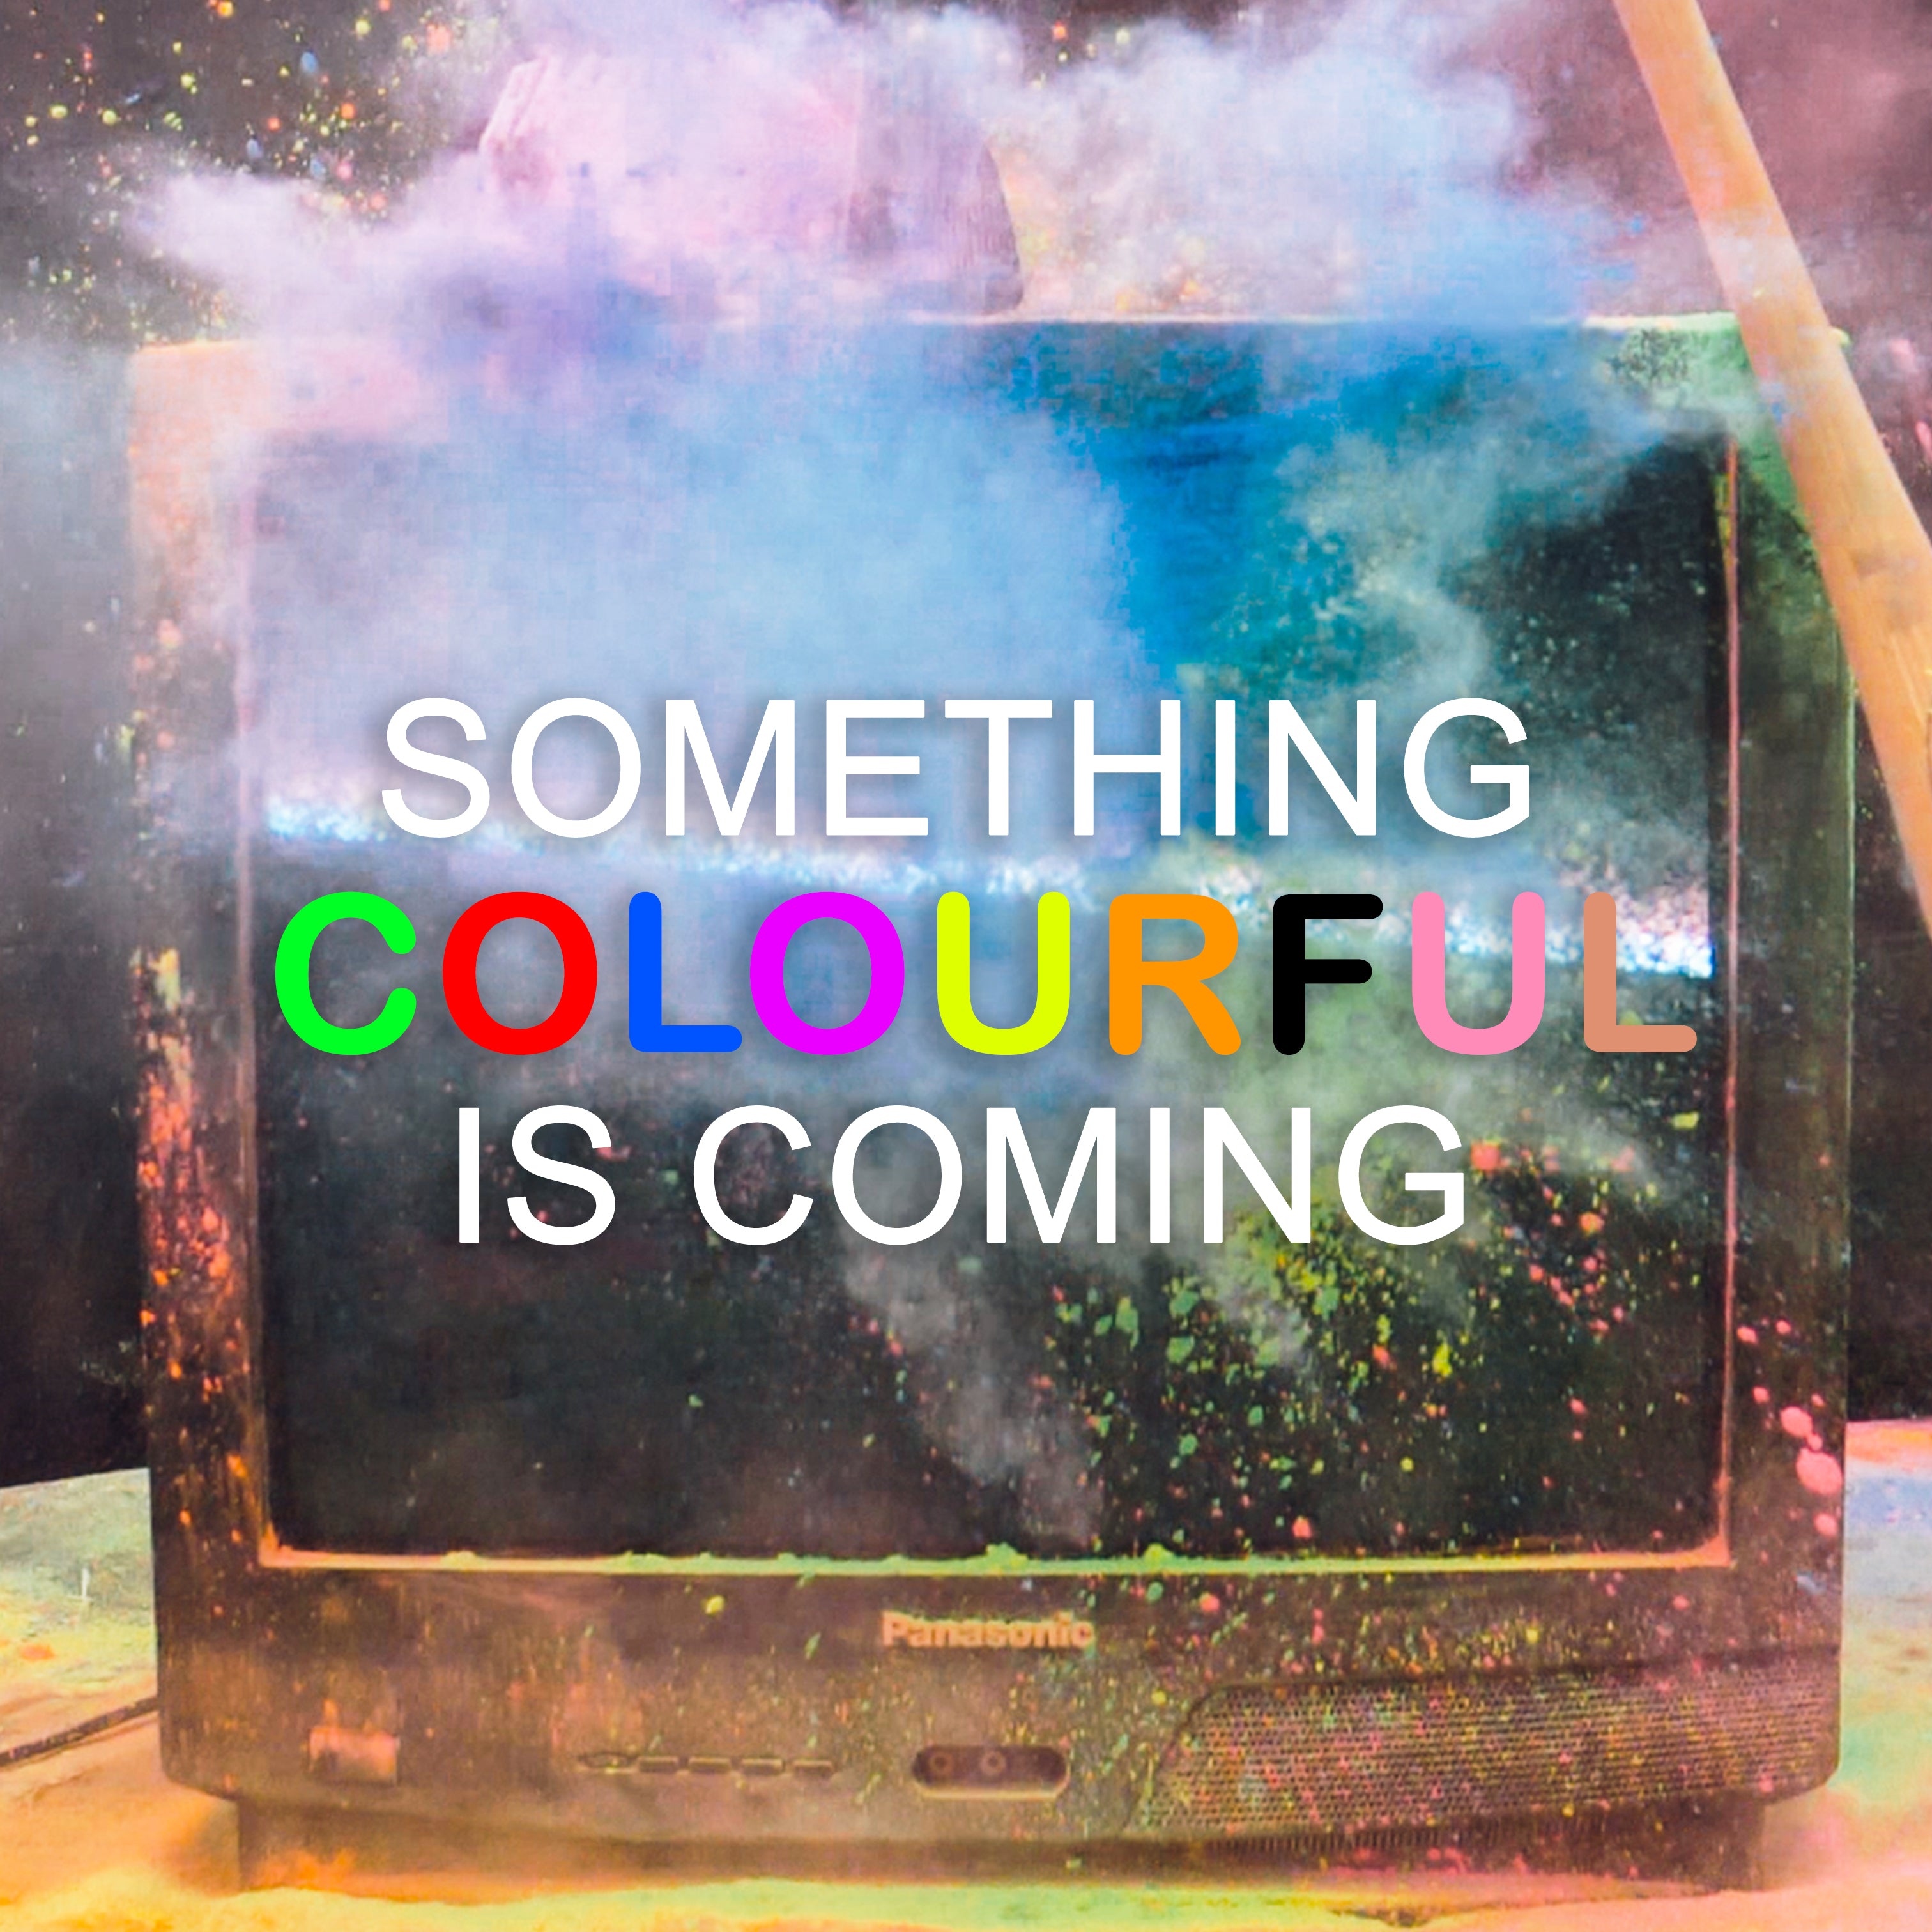 19/11/18 SOMETHING COLOURFUL IS COMING